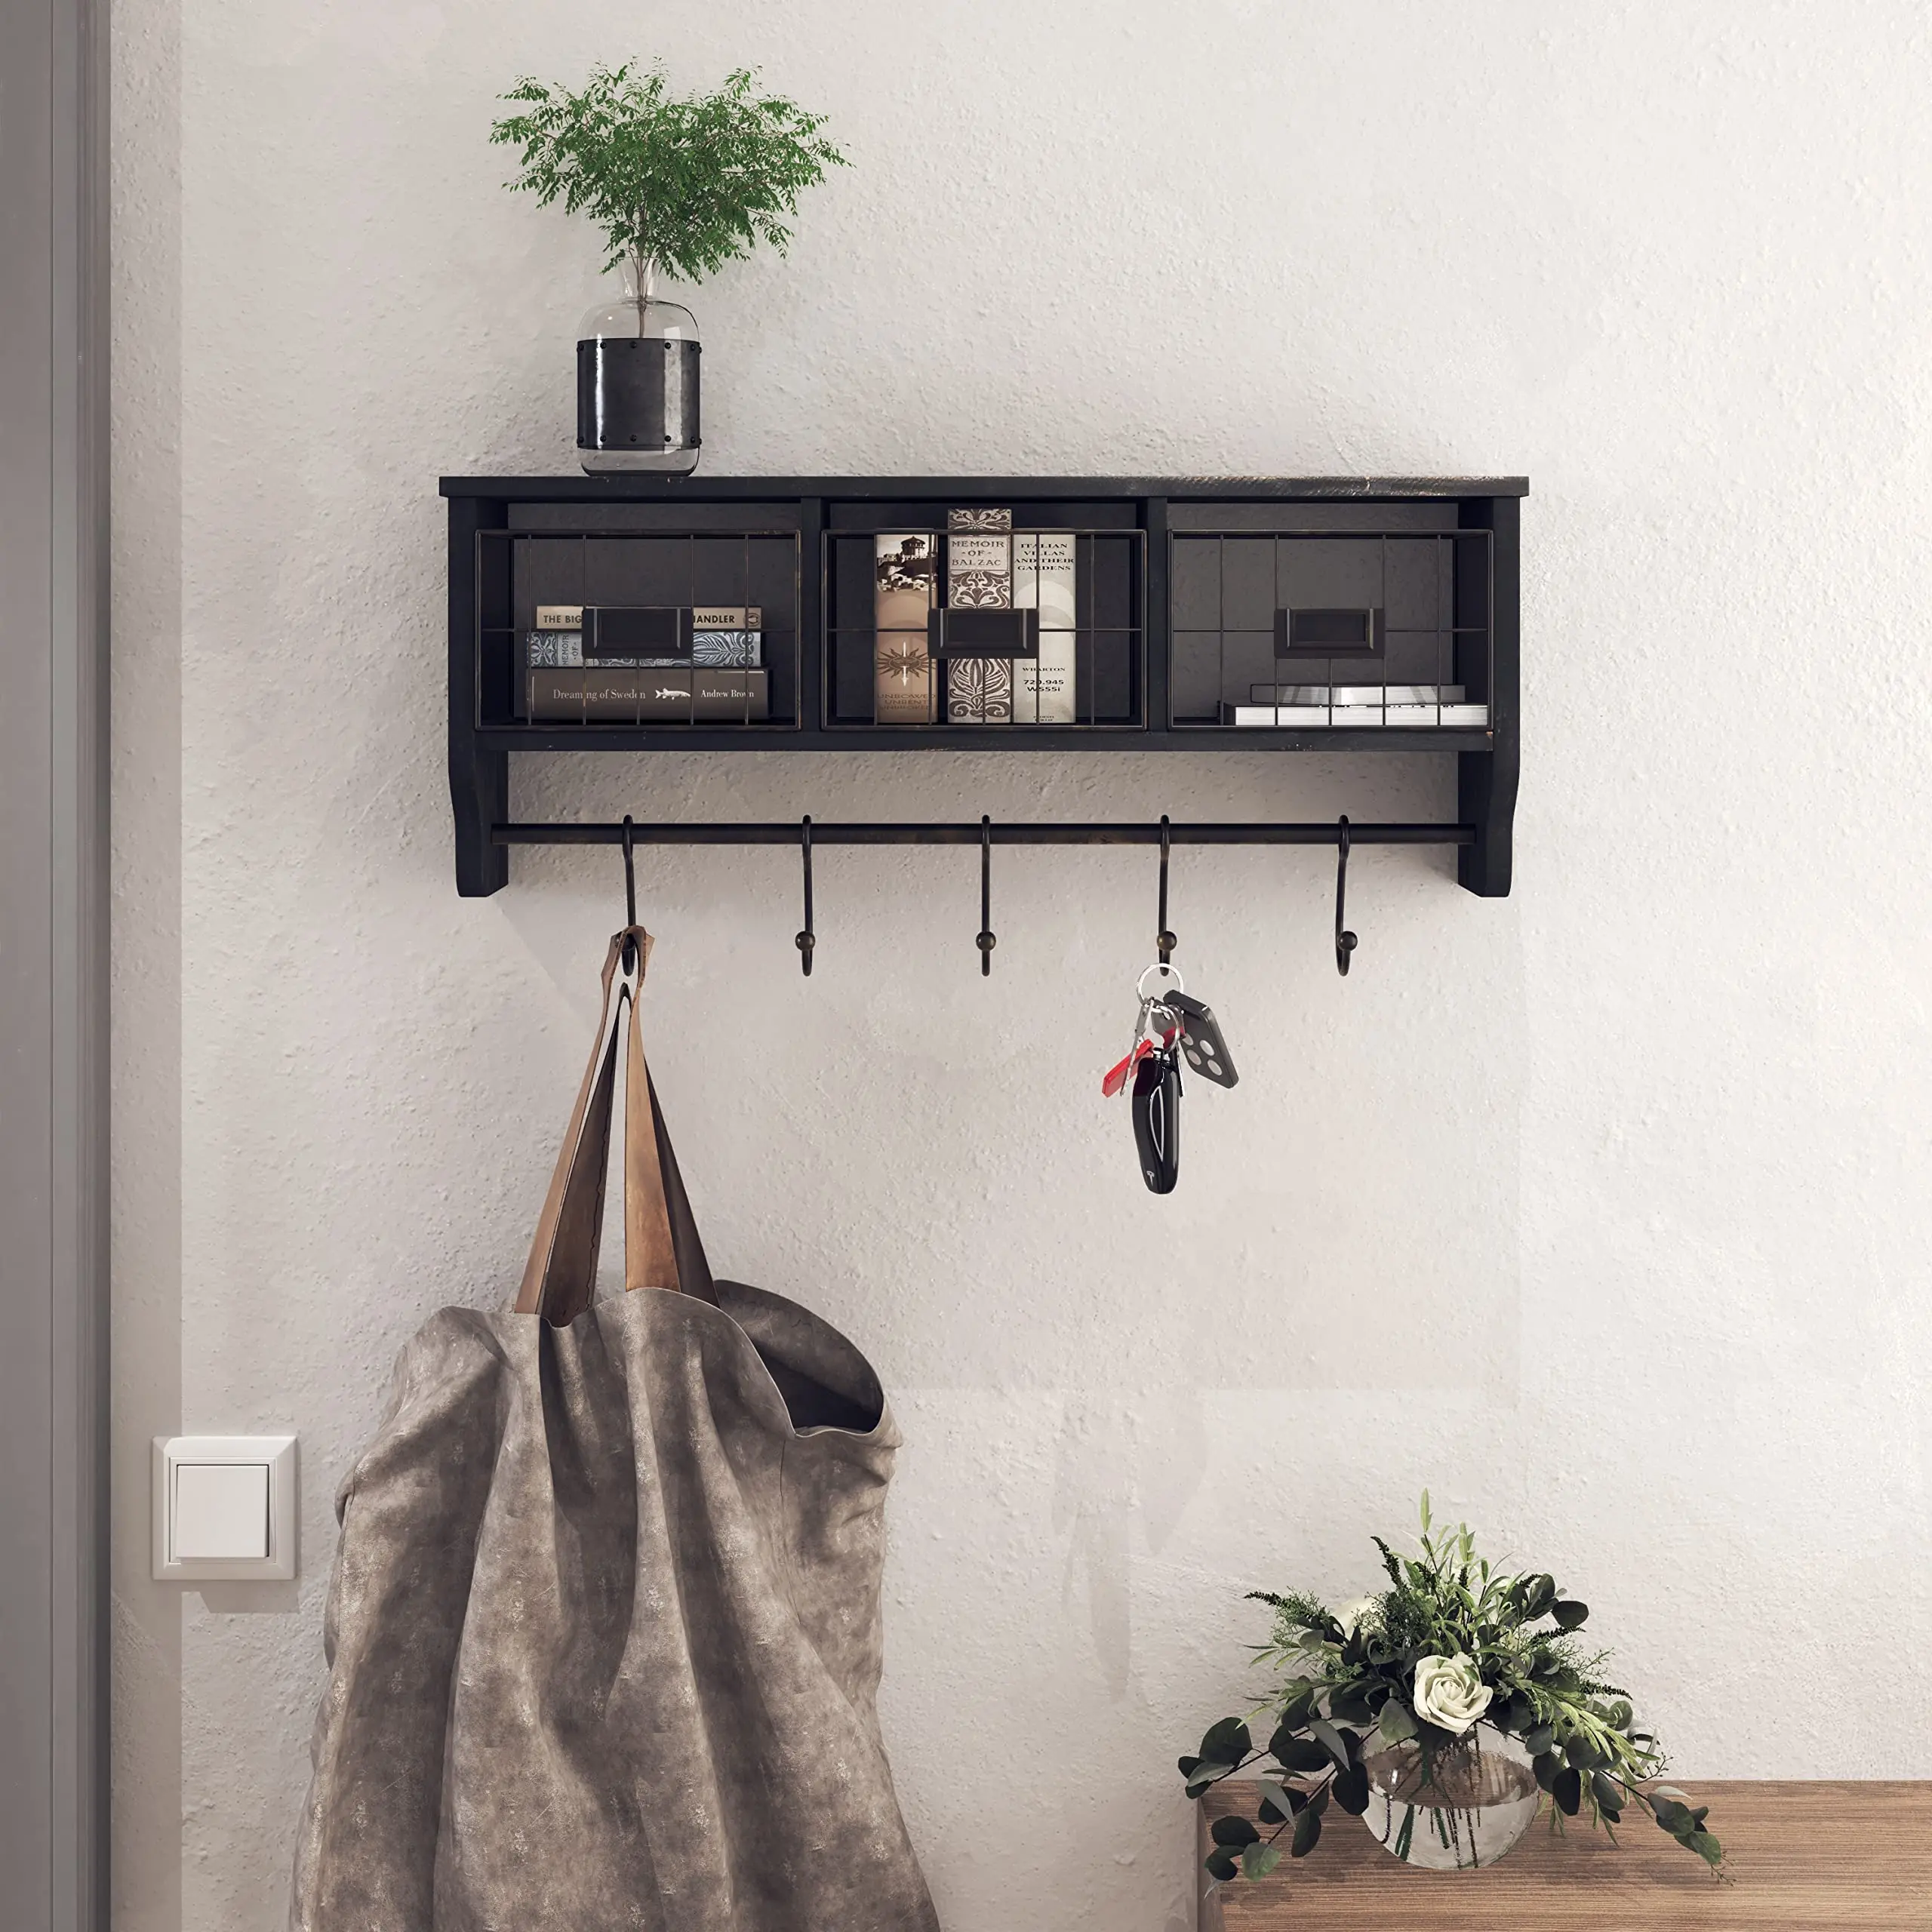 

Wall Mounted Shelf with Coat Hooks and Baskets, Solid Wood Entryway Organizer Wall Shelf with Hooks Rustic Blackwash 24" Wide